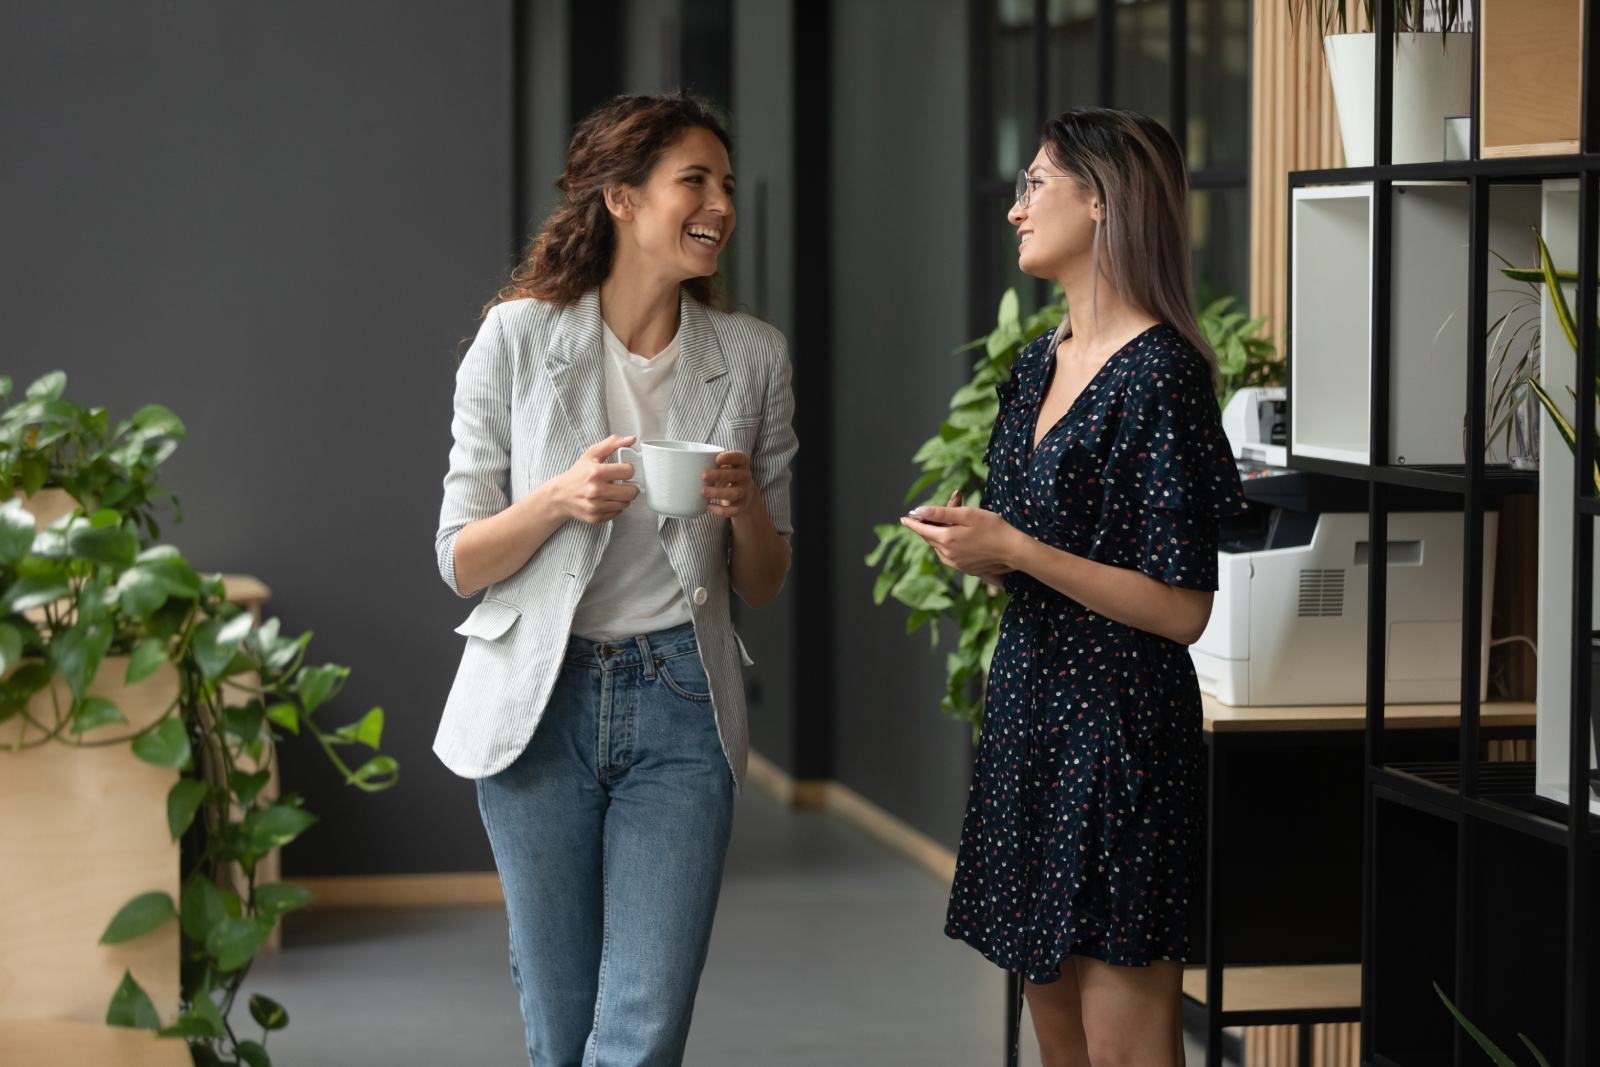 two business-women chatting in an office hallway